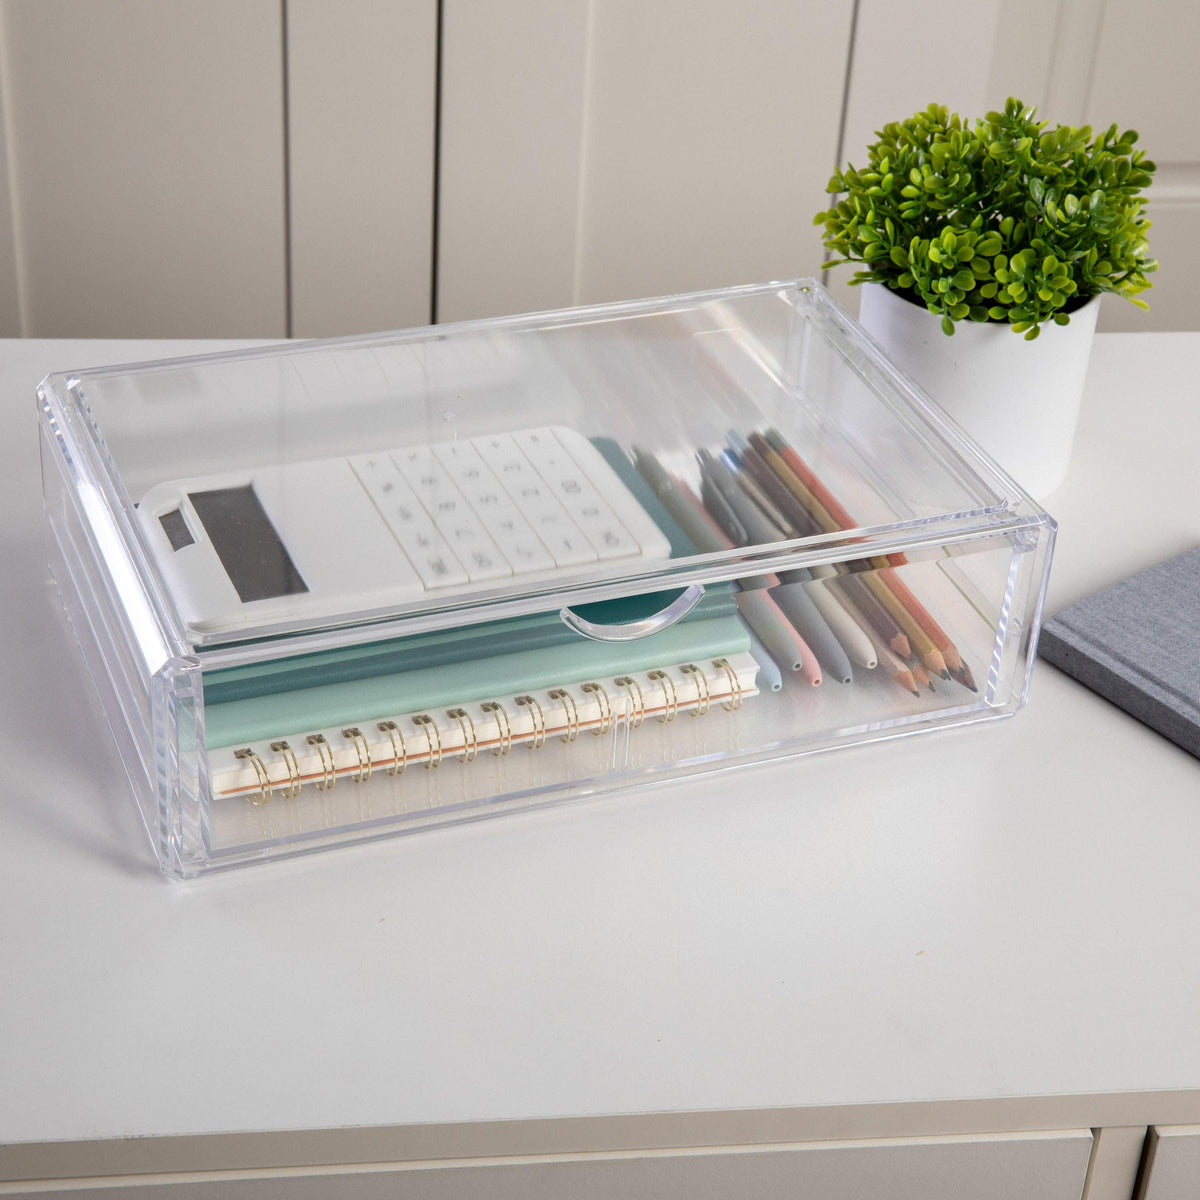 Desktop Organization Box with Half Moon Opening Pullout Drawer - Clear Plastic